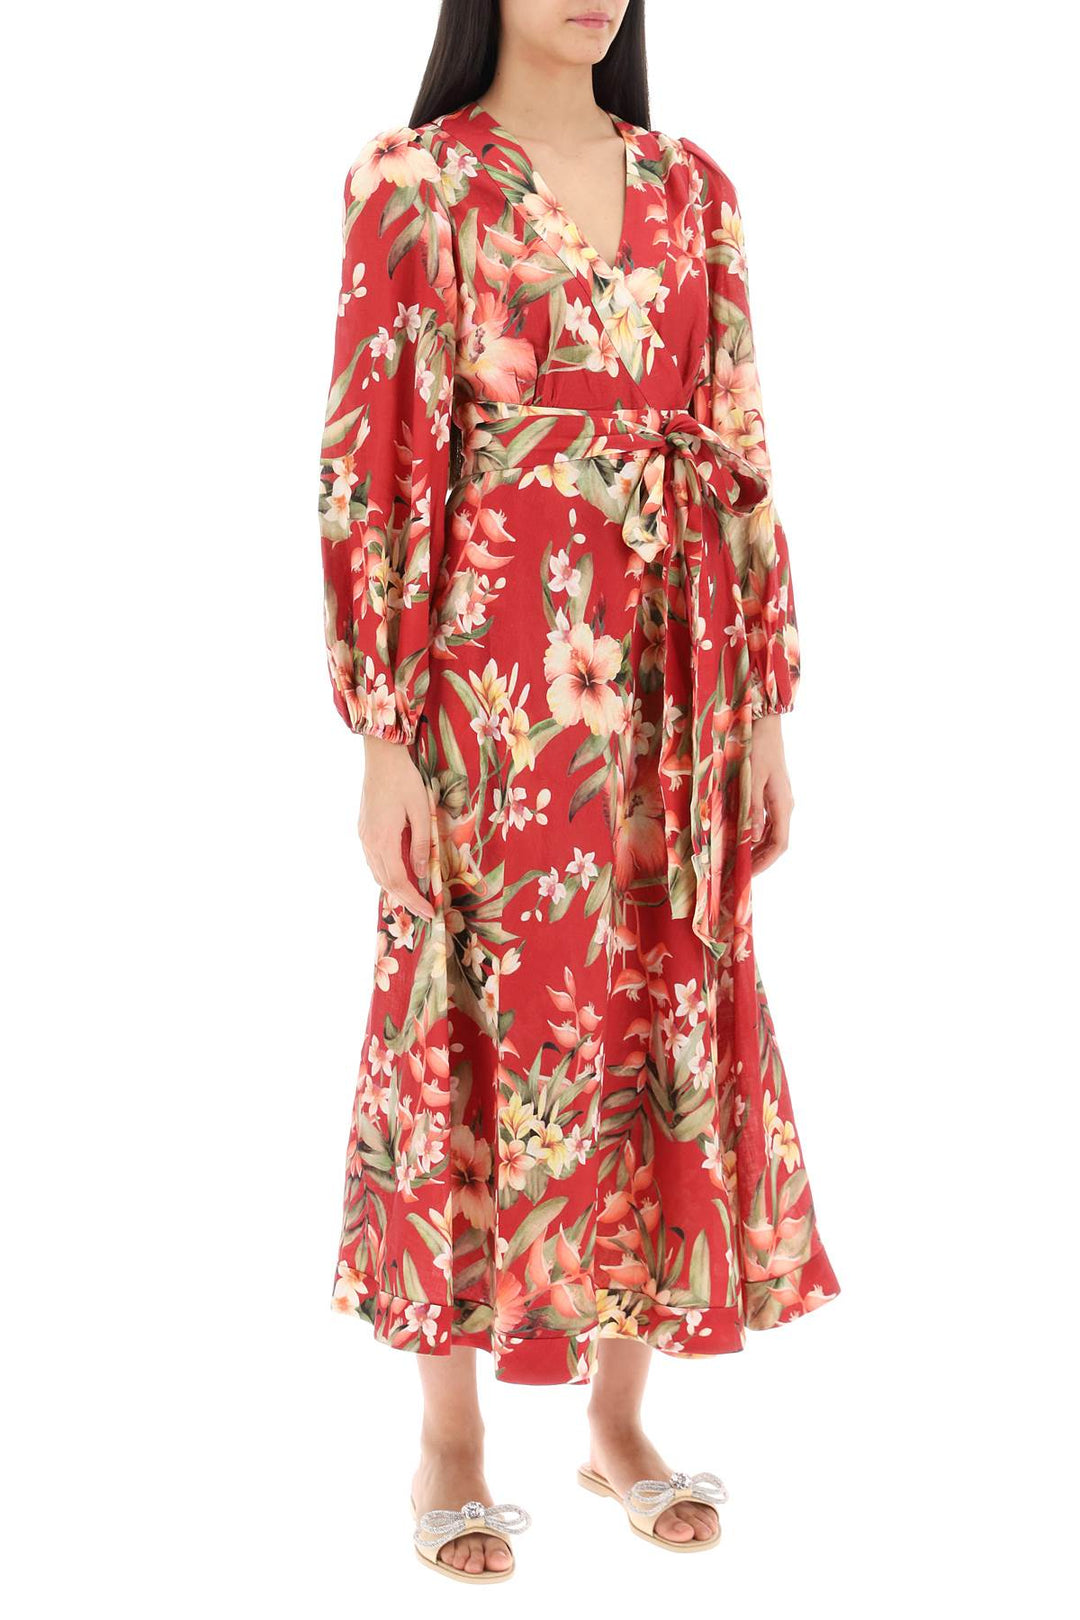 Zimmermann Lexi Wrap Dress With Floral Pattern   Red